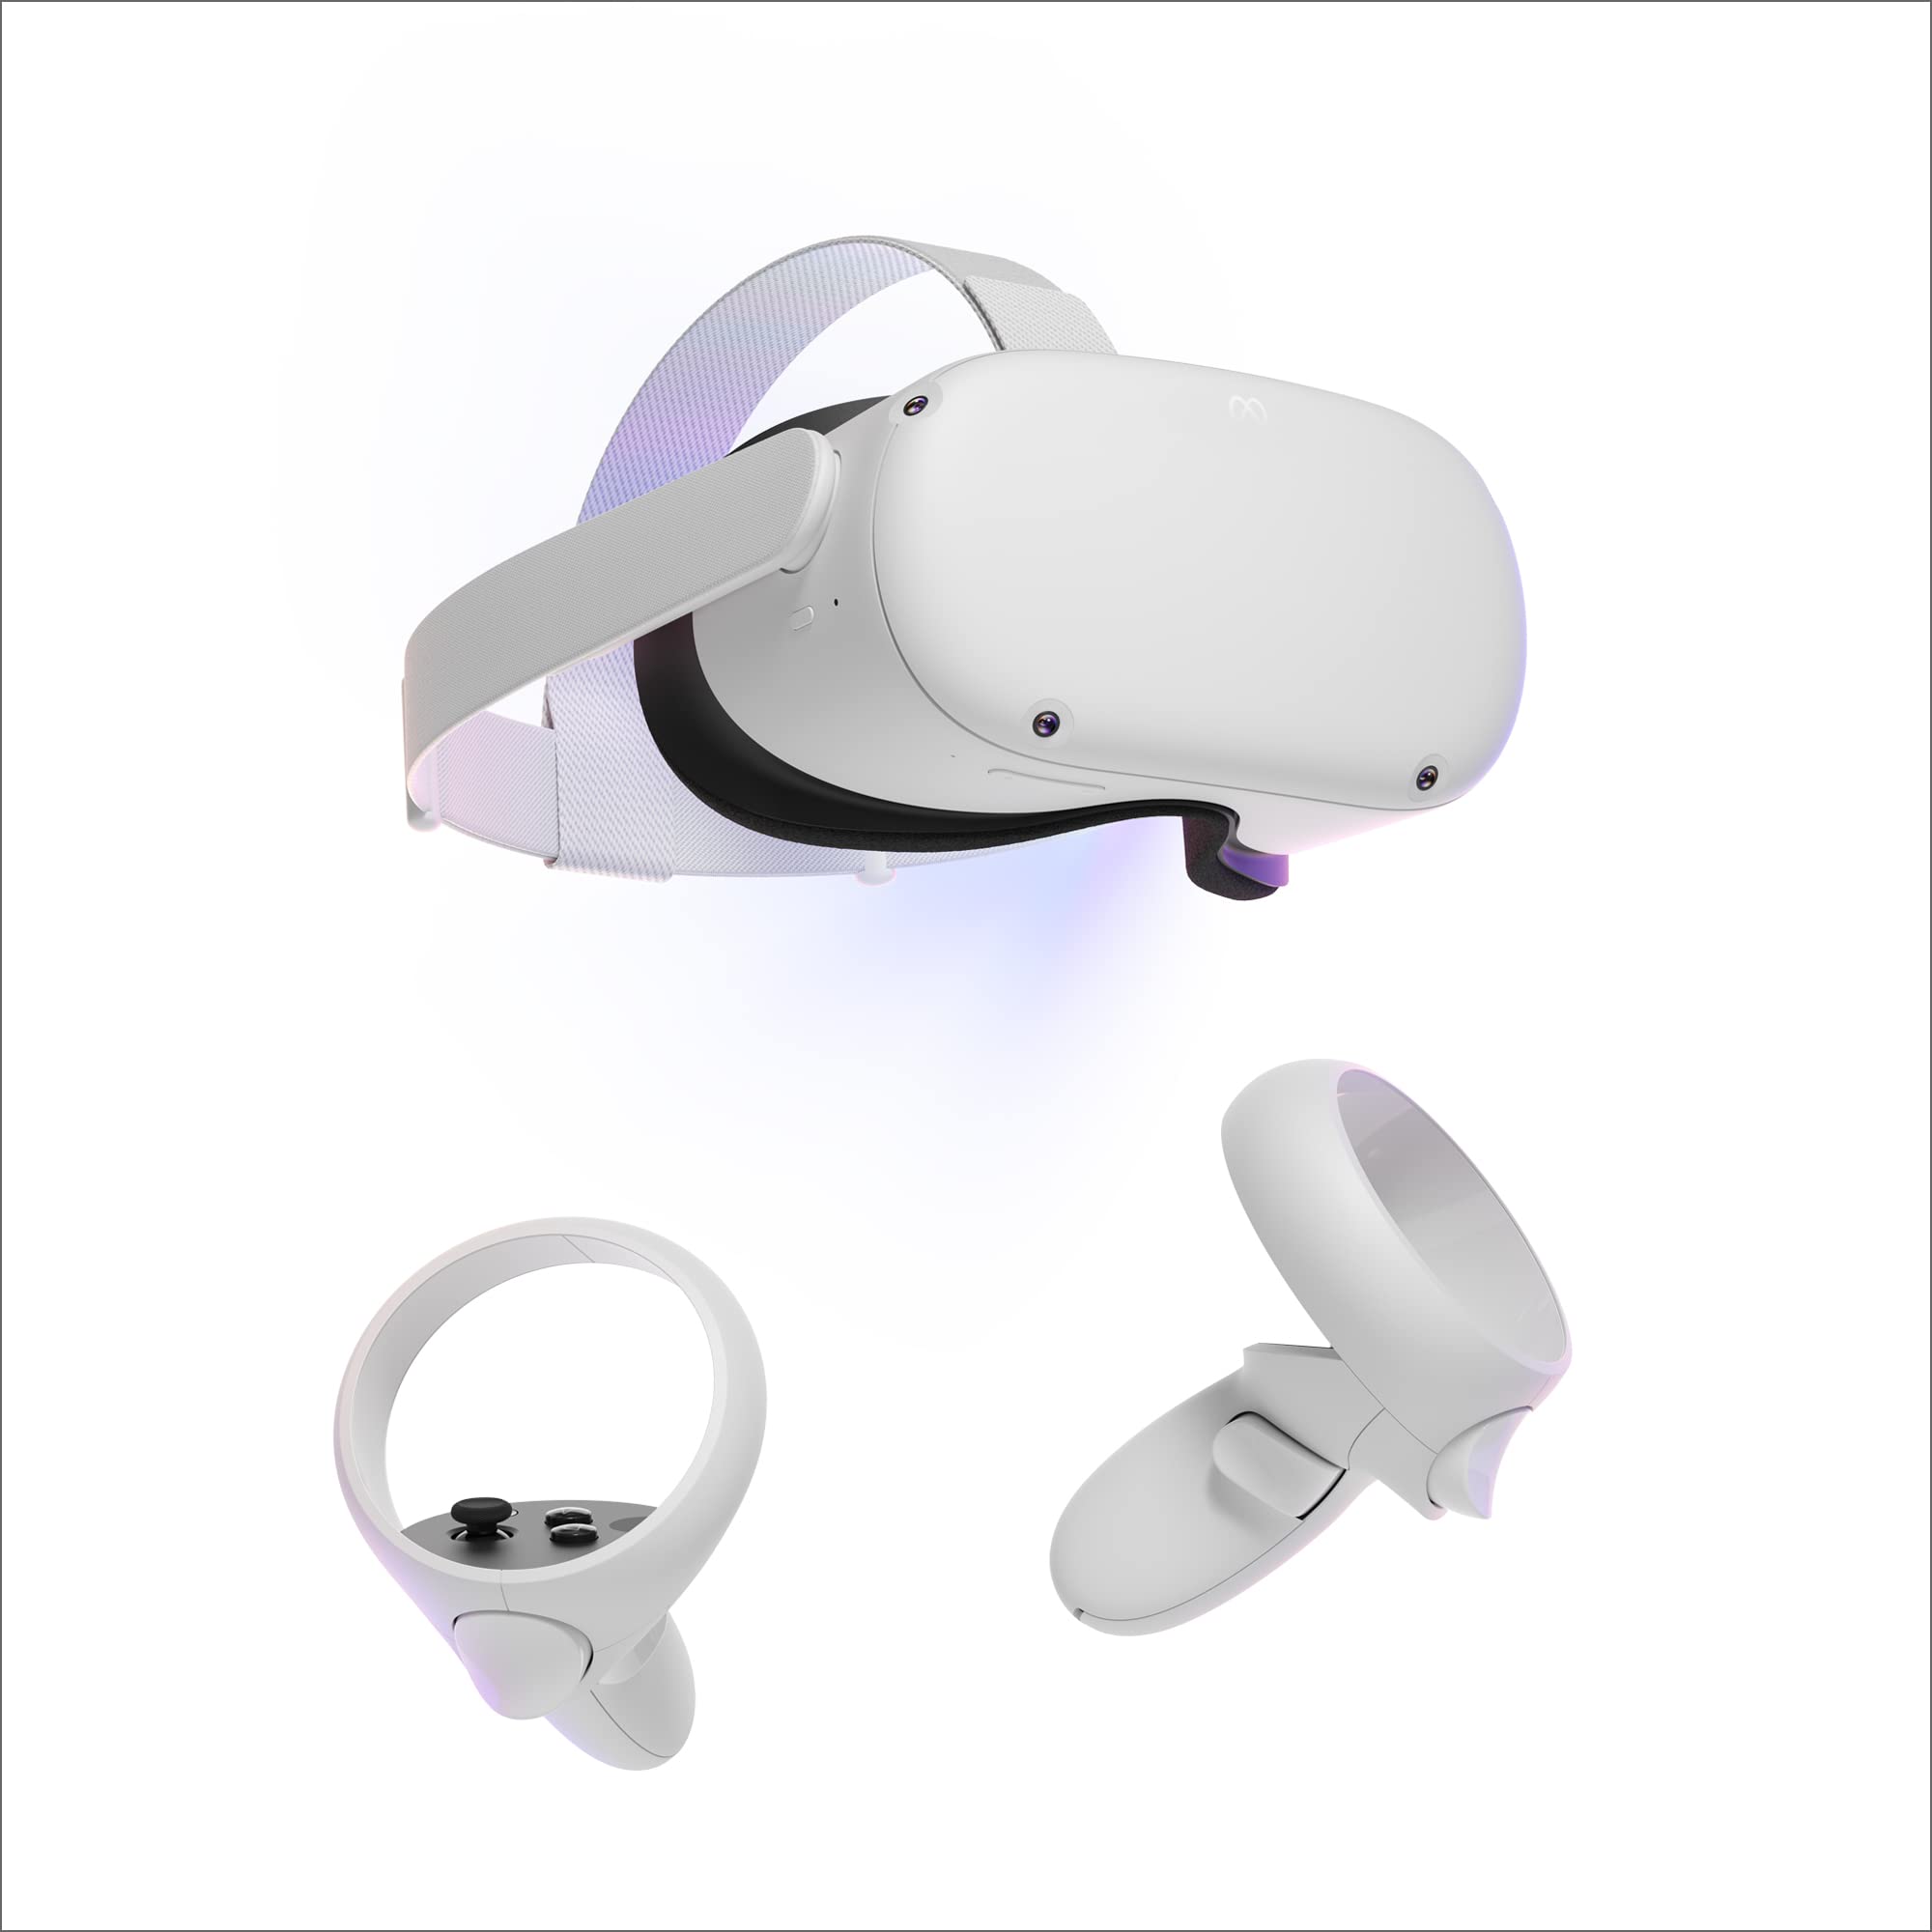 Meta Quest 2 256 GB All-In-One VR Headset - $308.40 + Free Shipping - Amazon